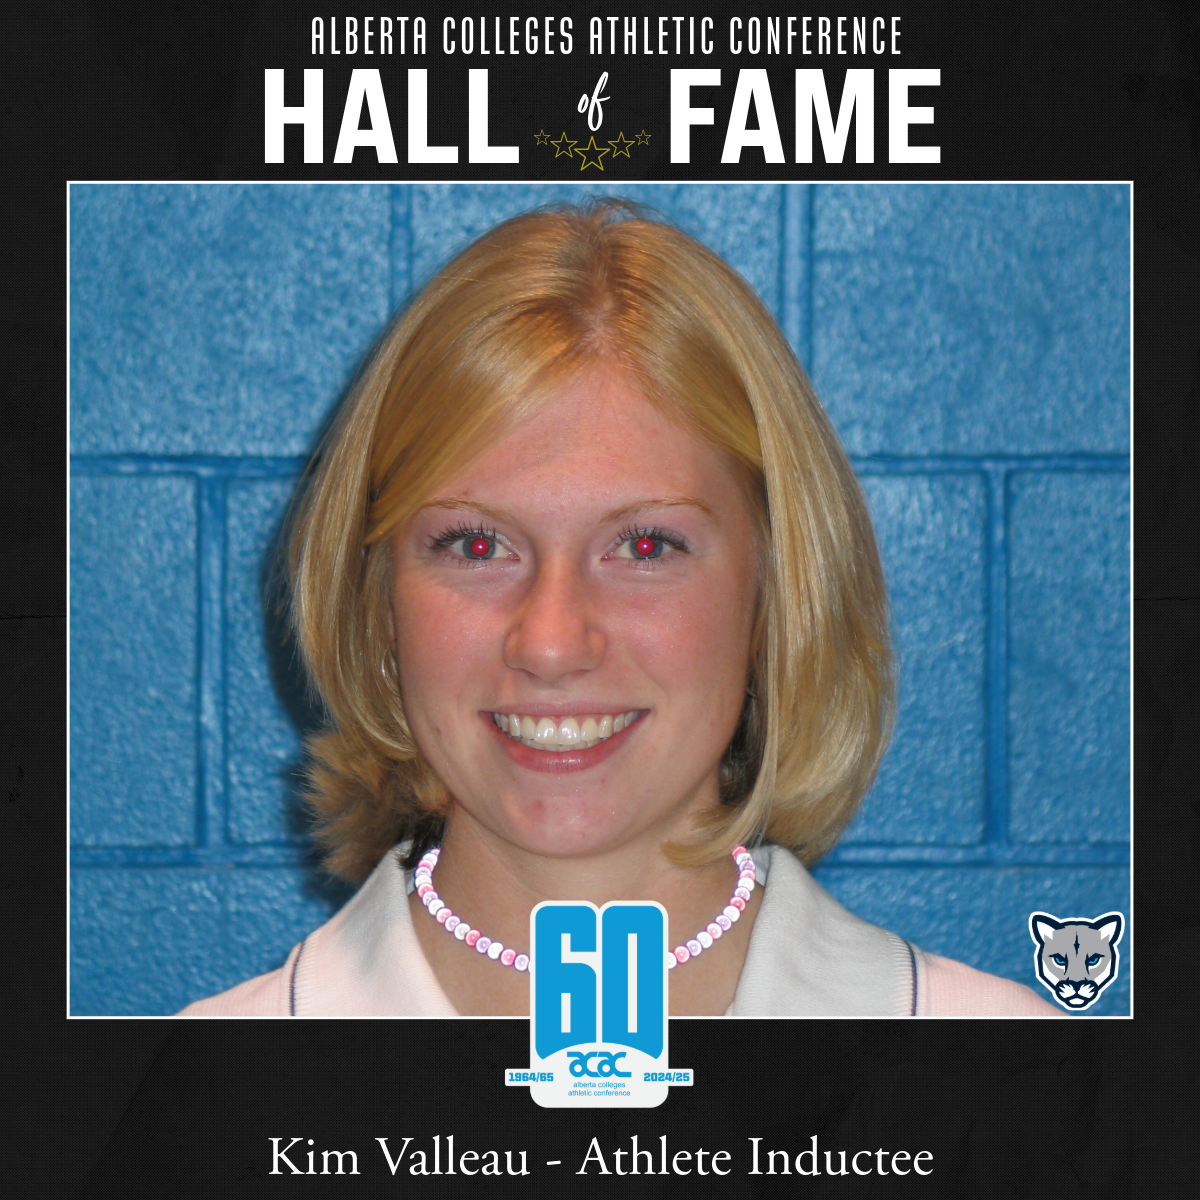 ACAC Hall of Fame Athlete Inductee: Kim Valleau